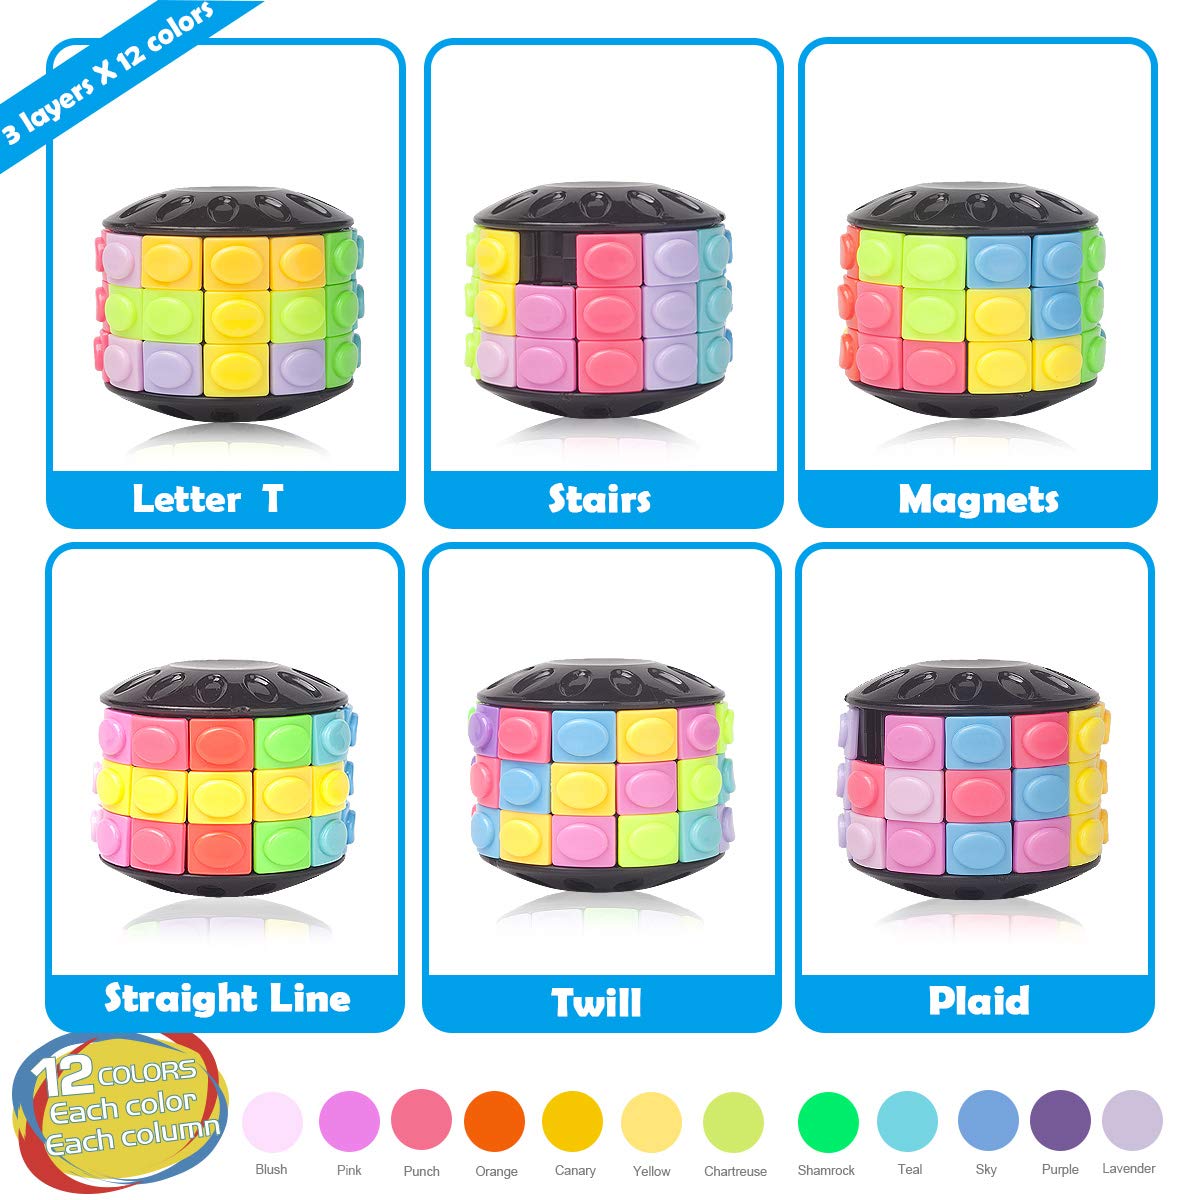 R.Y.TOYS Fidget Toys for Adults/Teens/Boys/Girls,Rotate & Slide Puzzle,Brain Teaser,Cylinder Magic Cube Gift,Birthday Present(12 Colors x 10 Layers) Upgrade